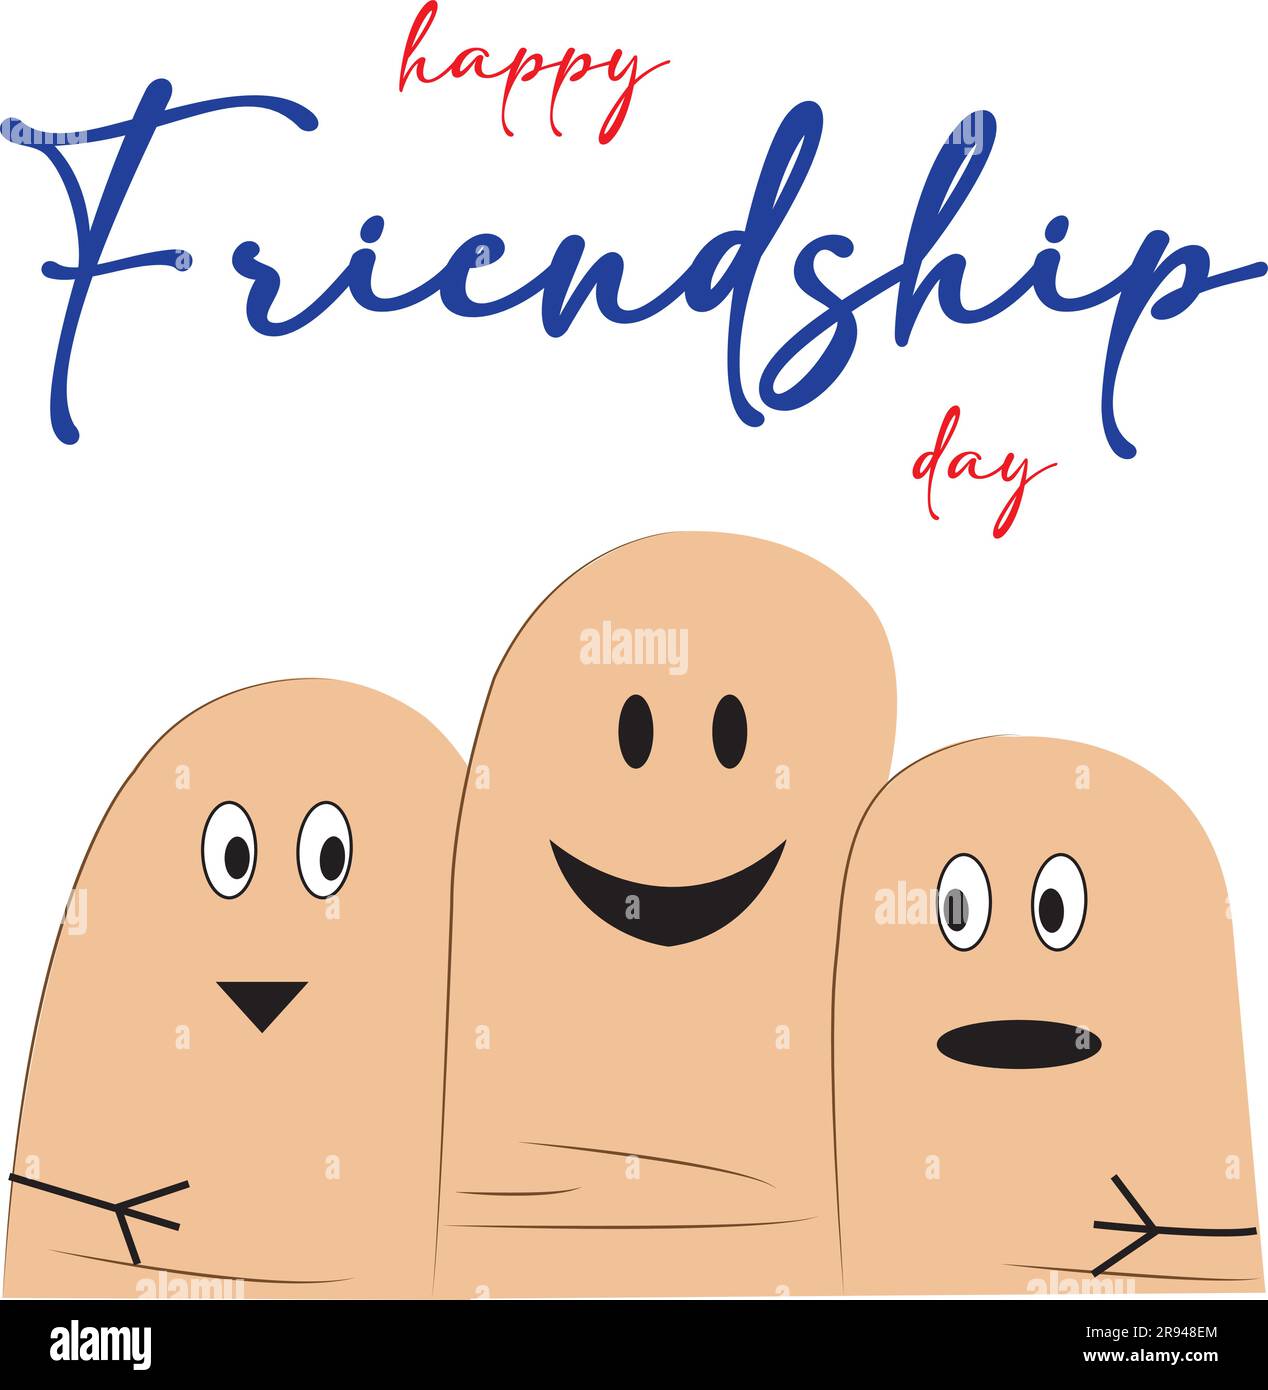 Friendship day banner with three fingers smiling and hugging each other Stock Vector